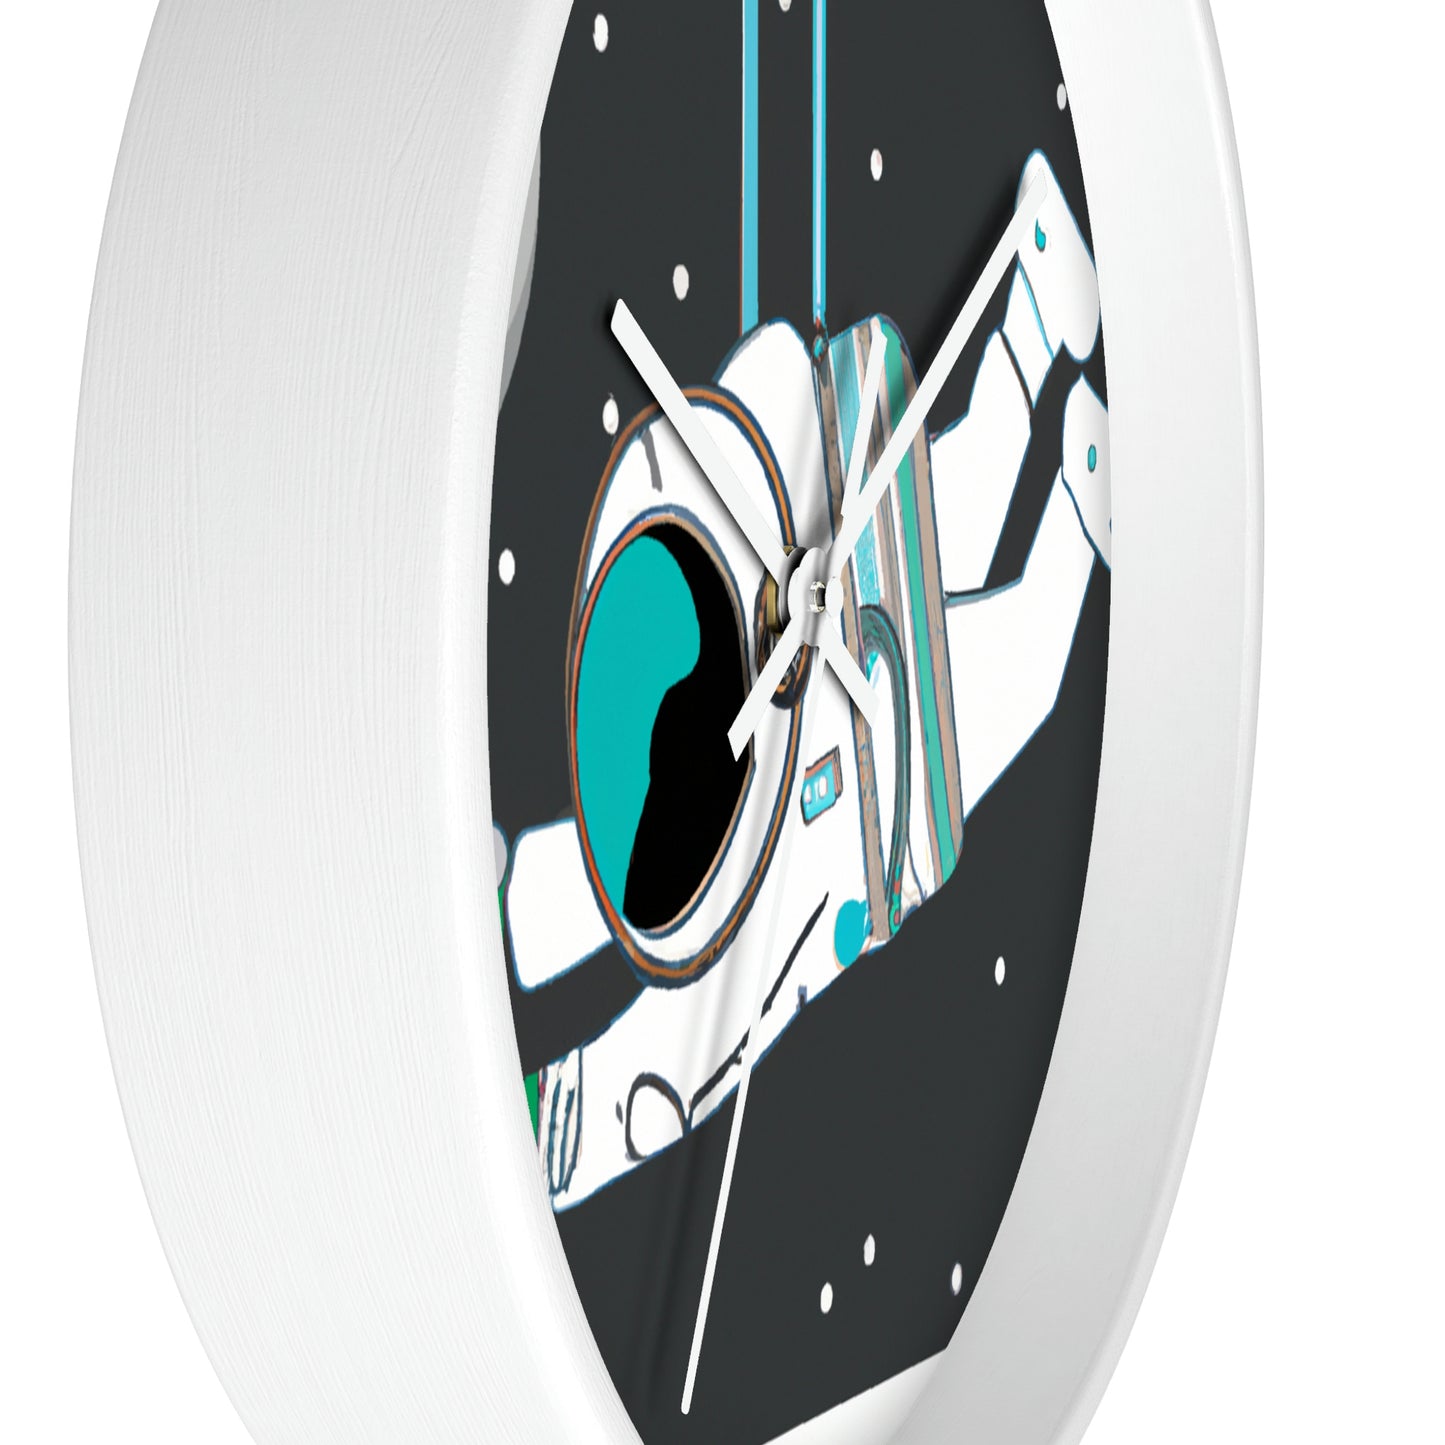 "Mission: Comet Rescue" - The Alien Wall Clock